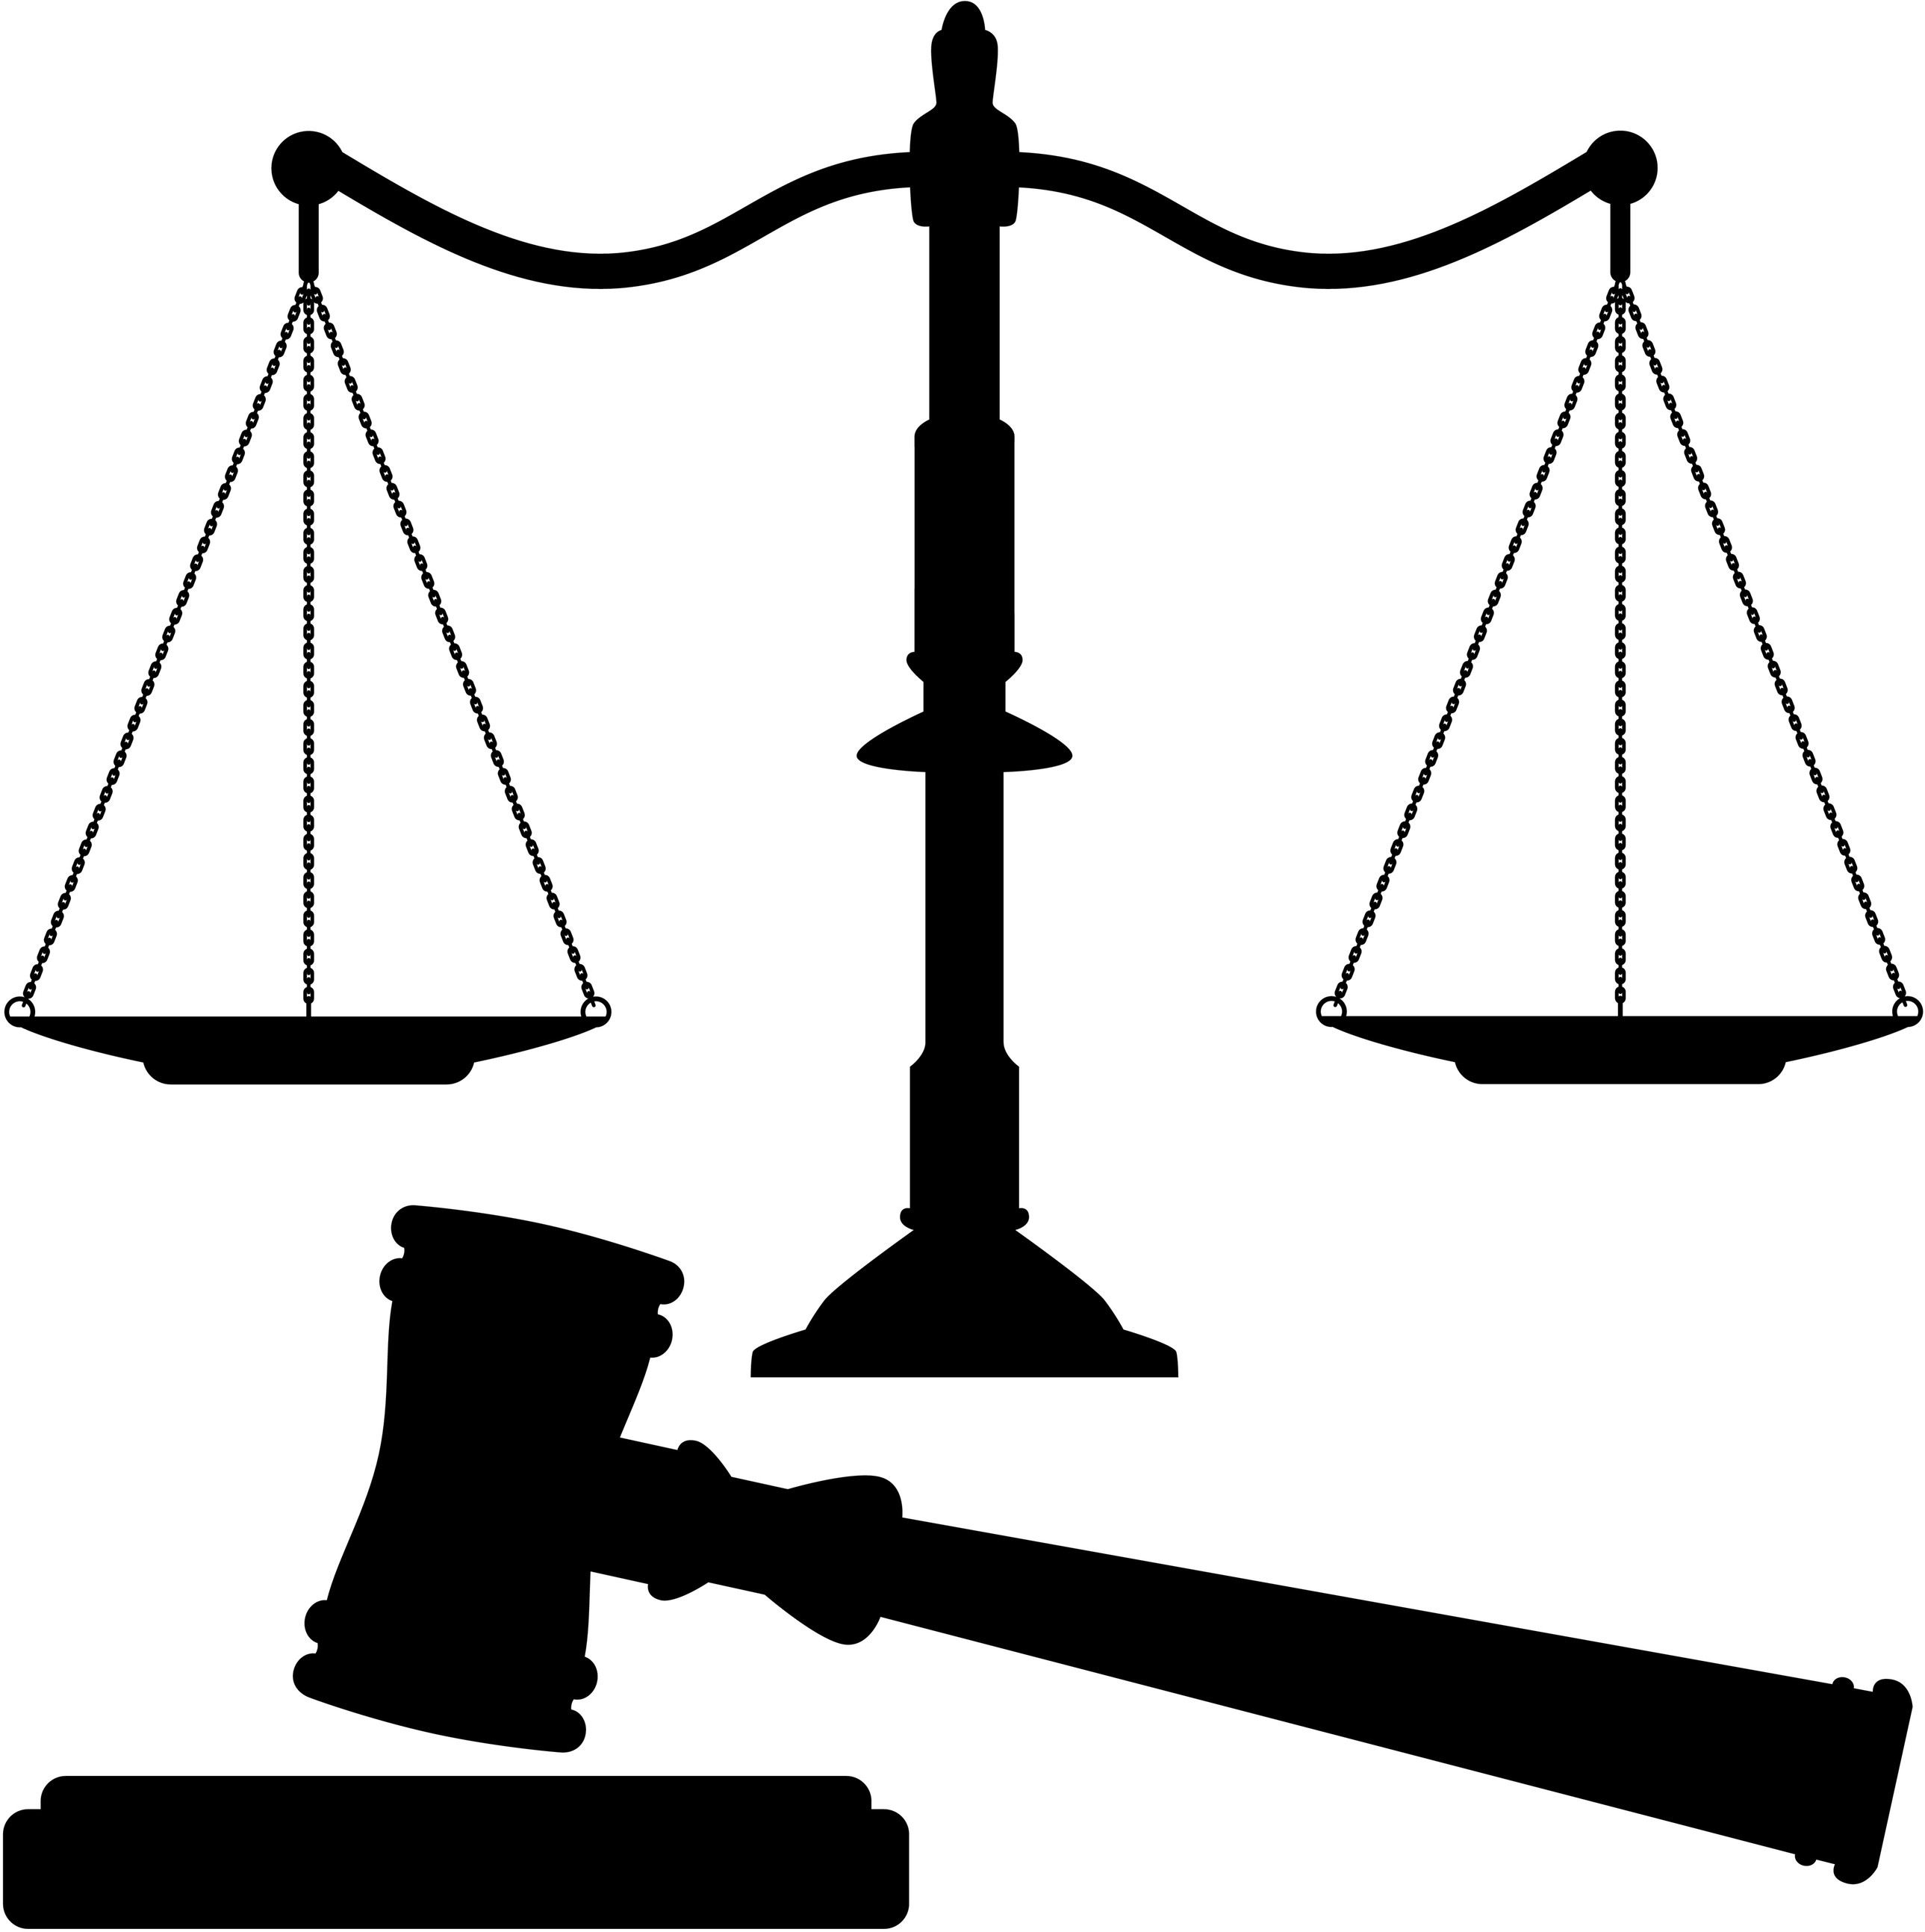 scales of justice clip art free download - photo #30